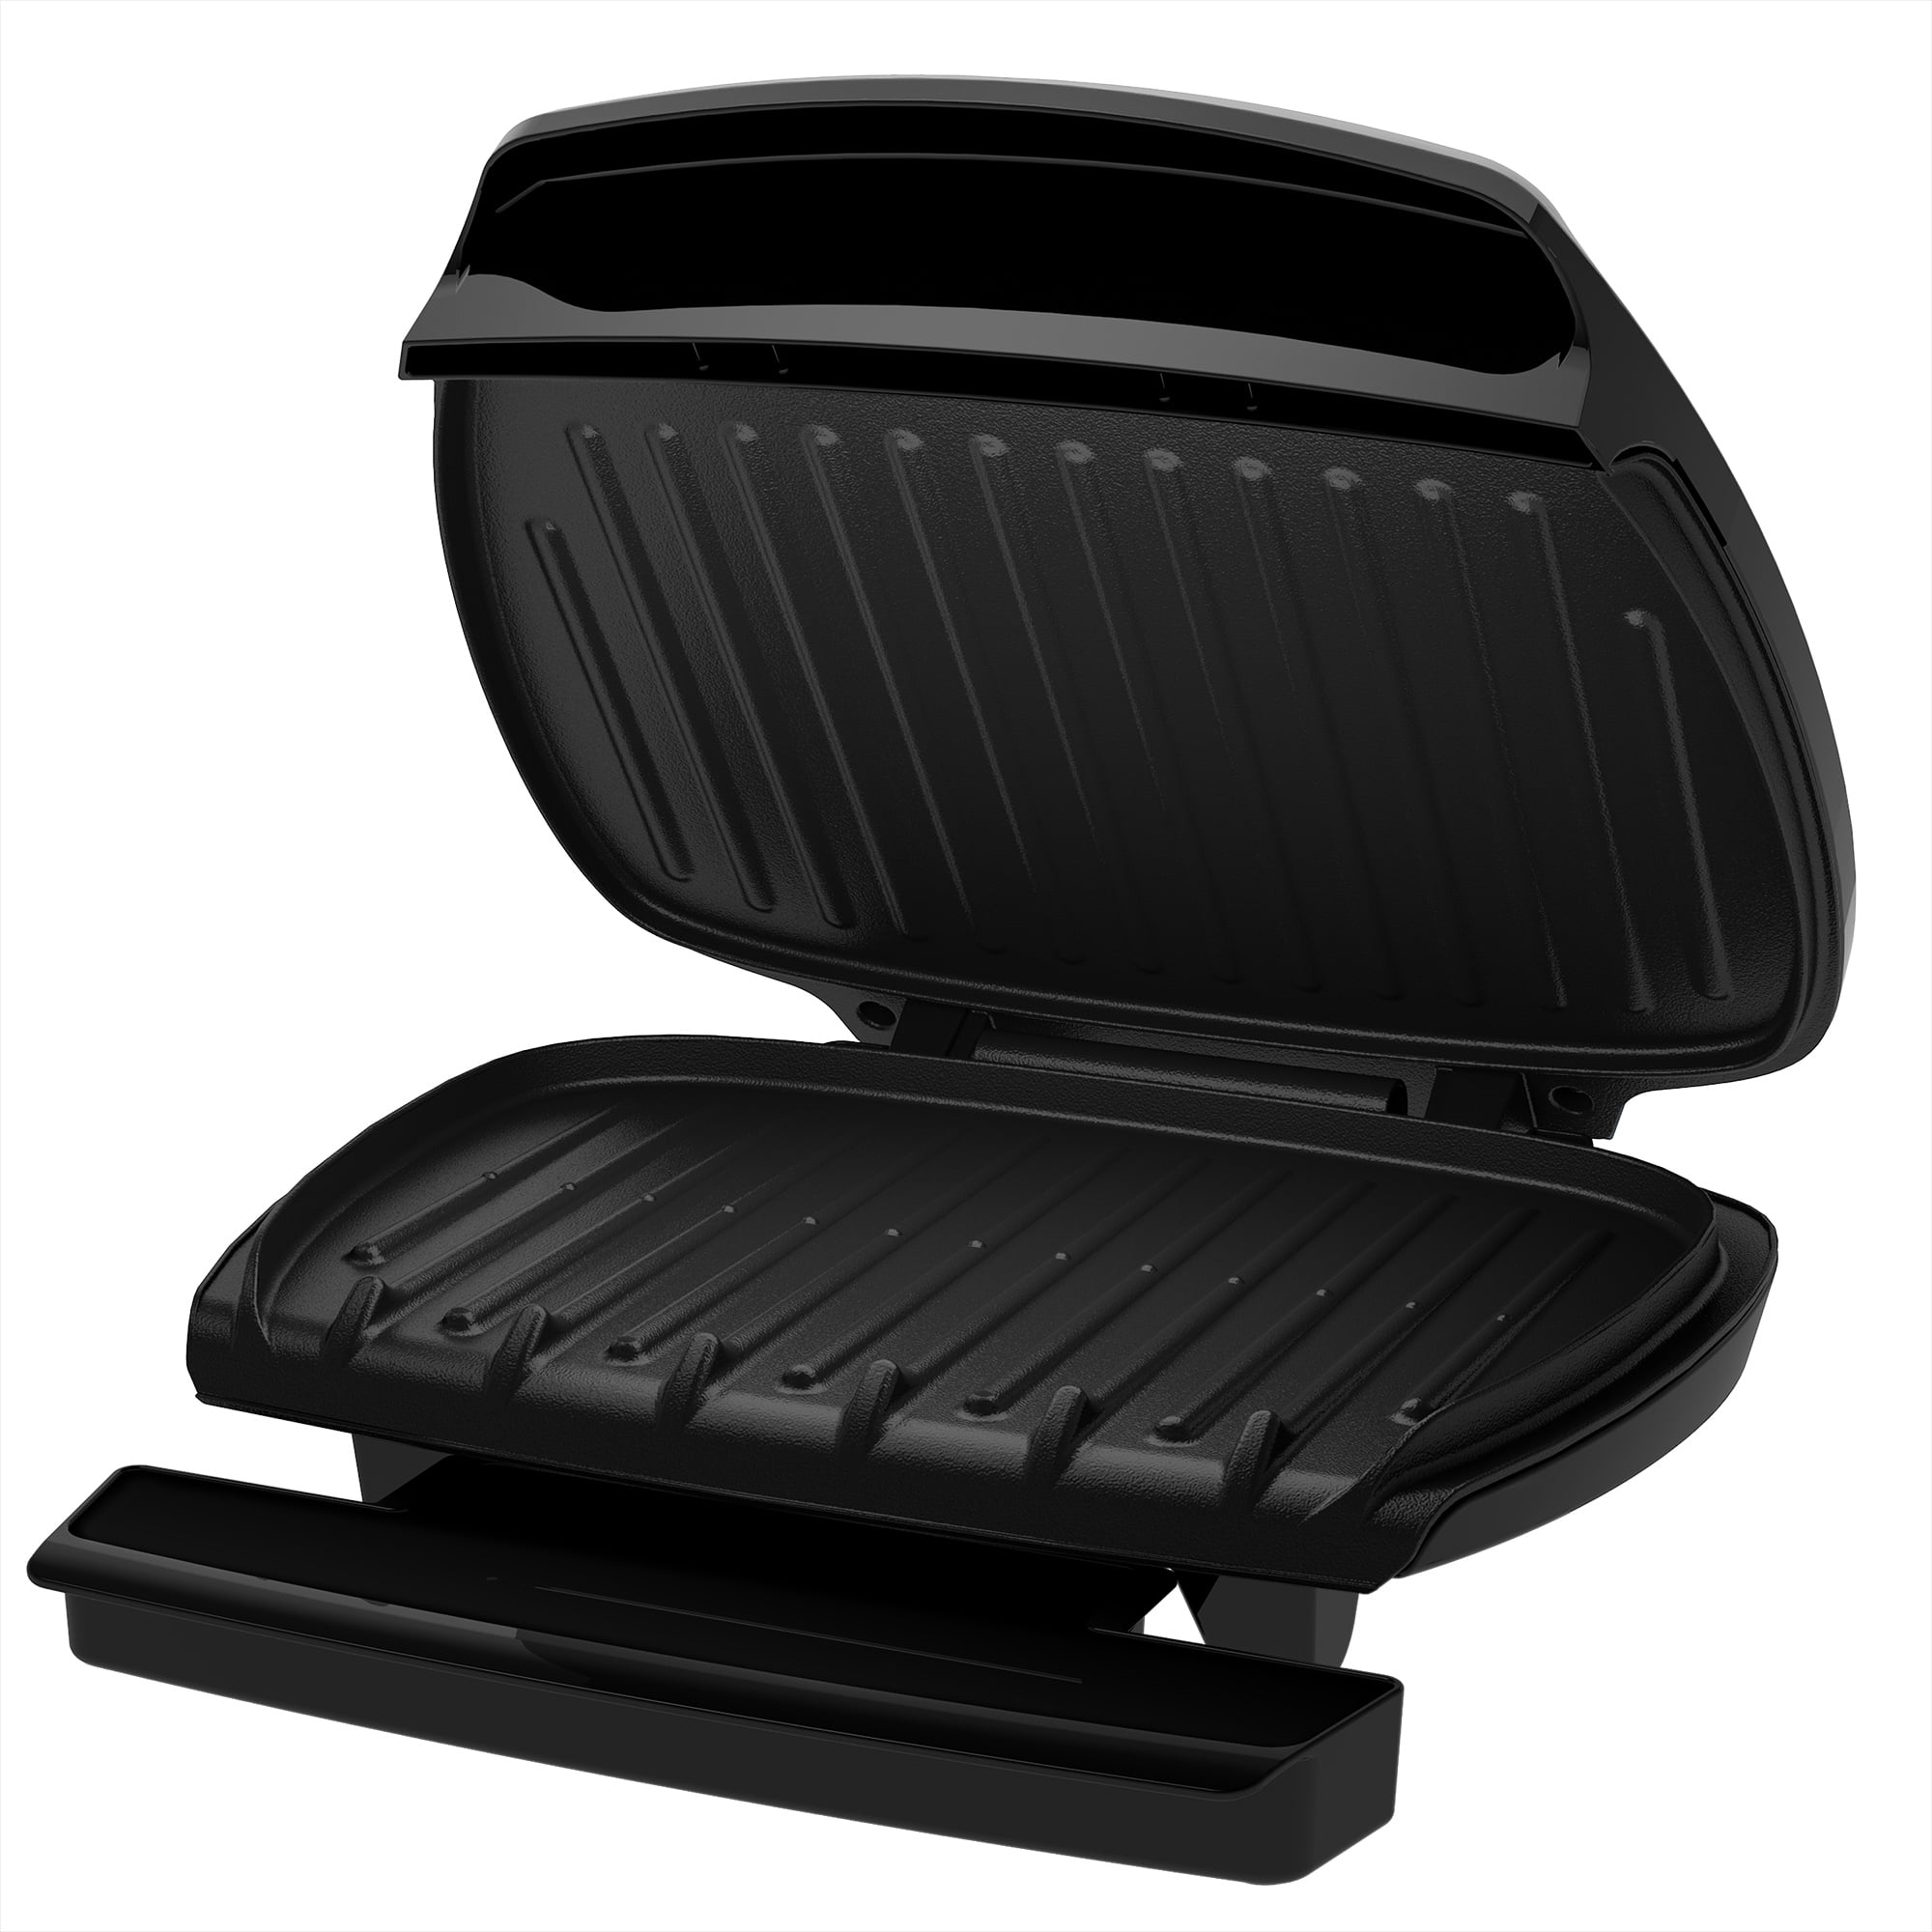 George Foreman 5-Serving Classic Plate Grill